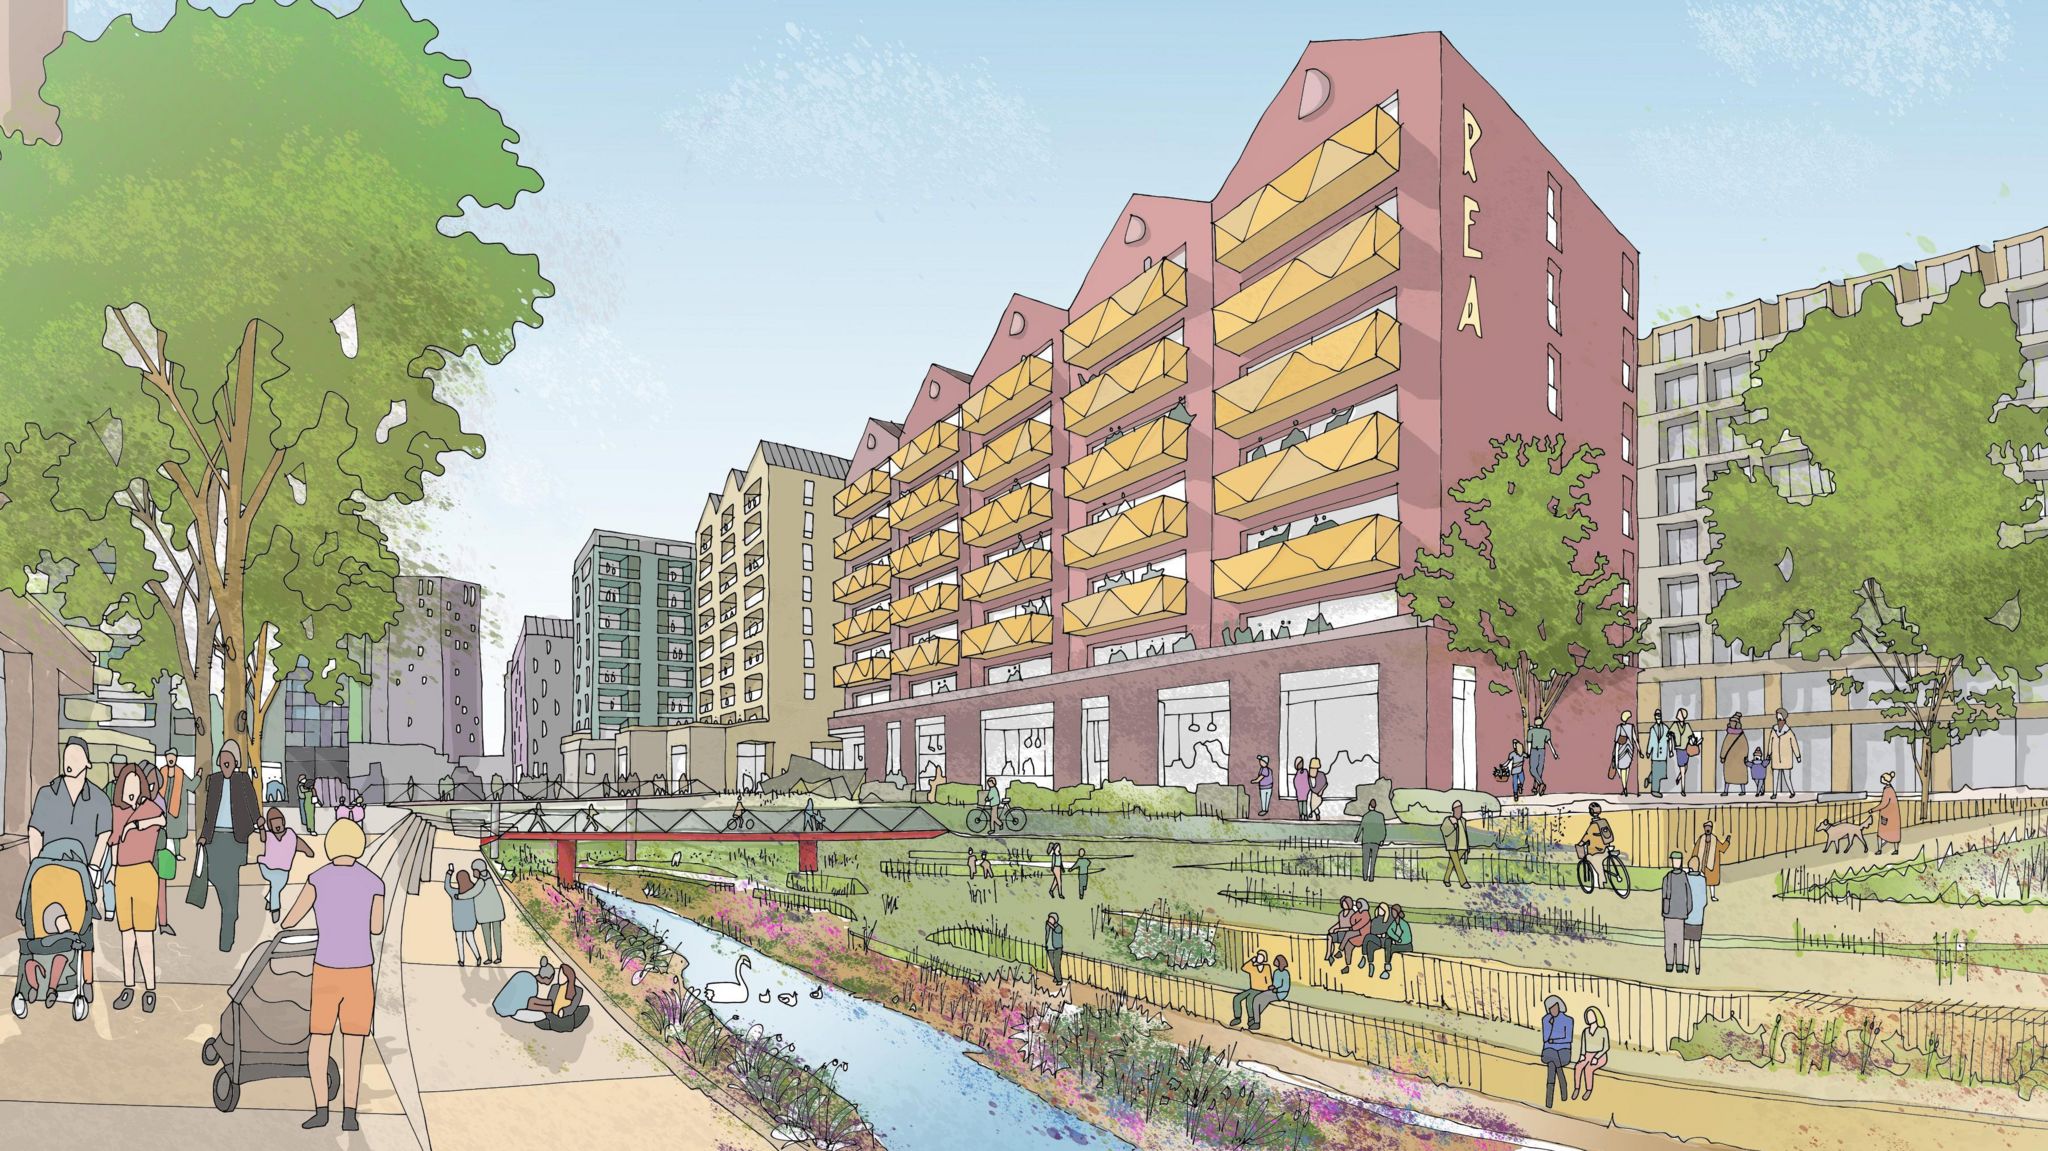 Artist's impression of how Birmingham could look - a block of flats set behind the Rea river, green space and a pedestrian route